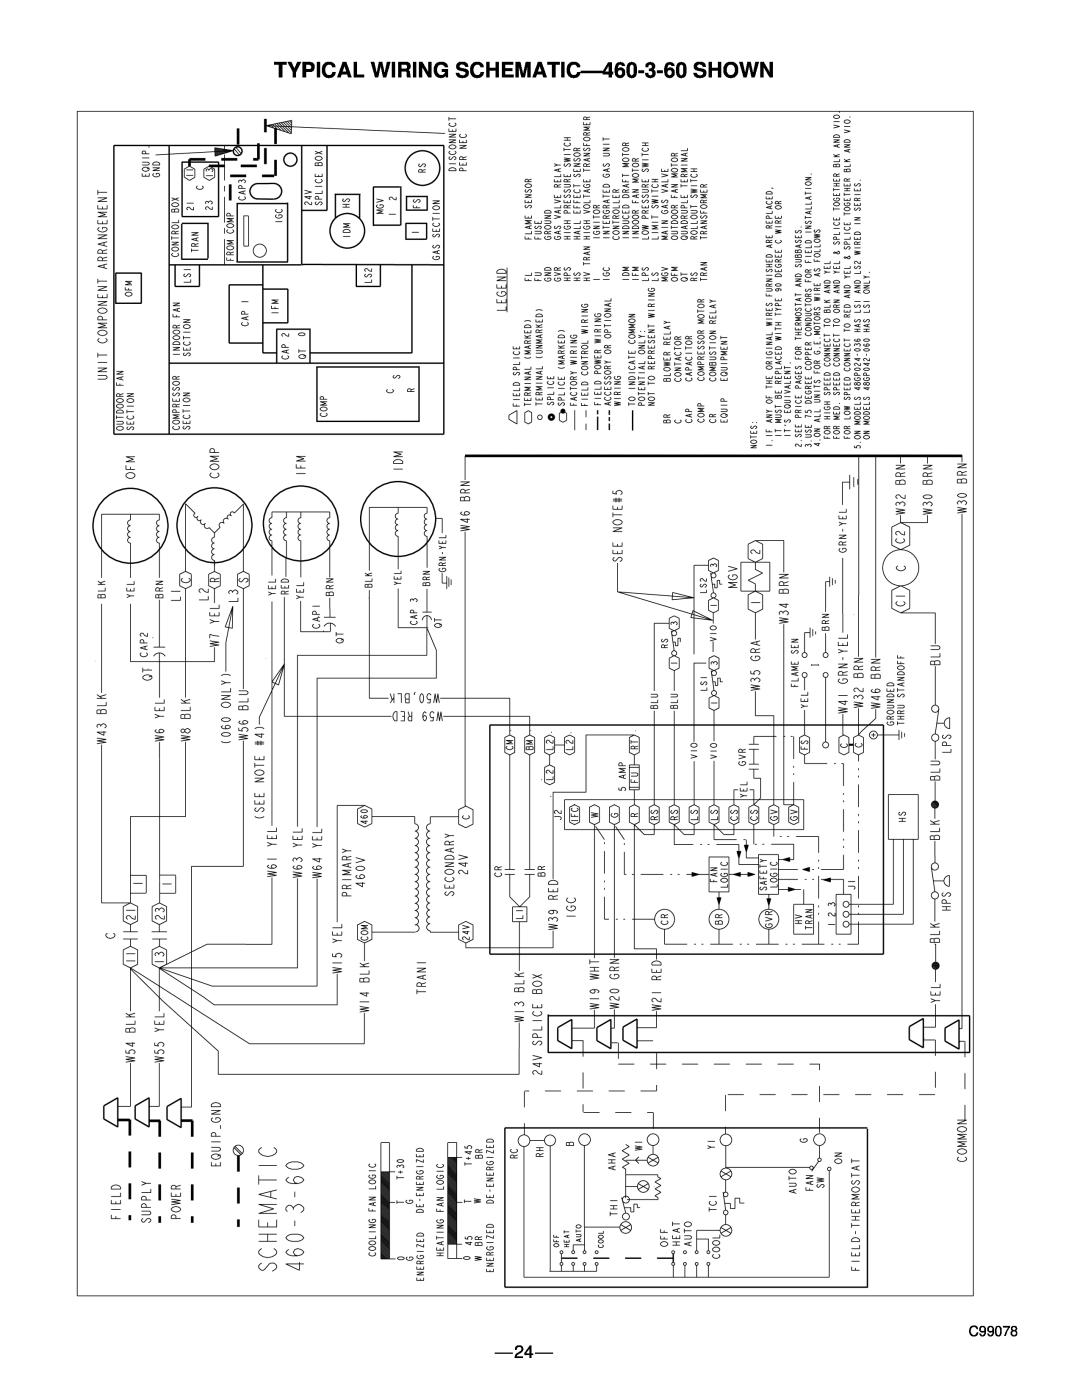 Bryant 583B manual TYPICAL WIRING SCHEMATIC-460-3-60SHOWN 